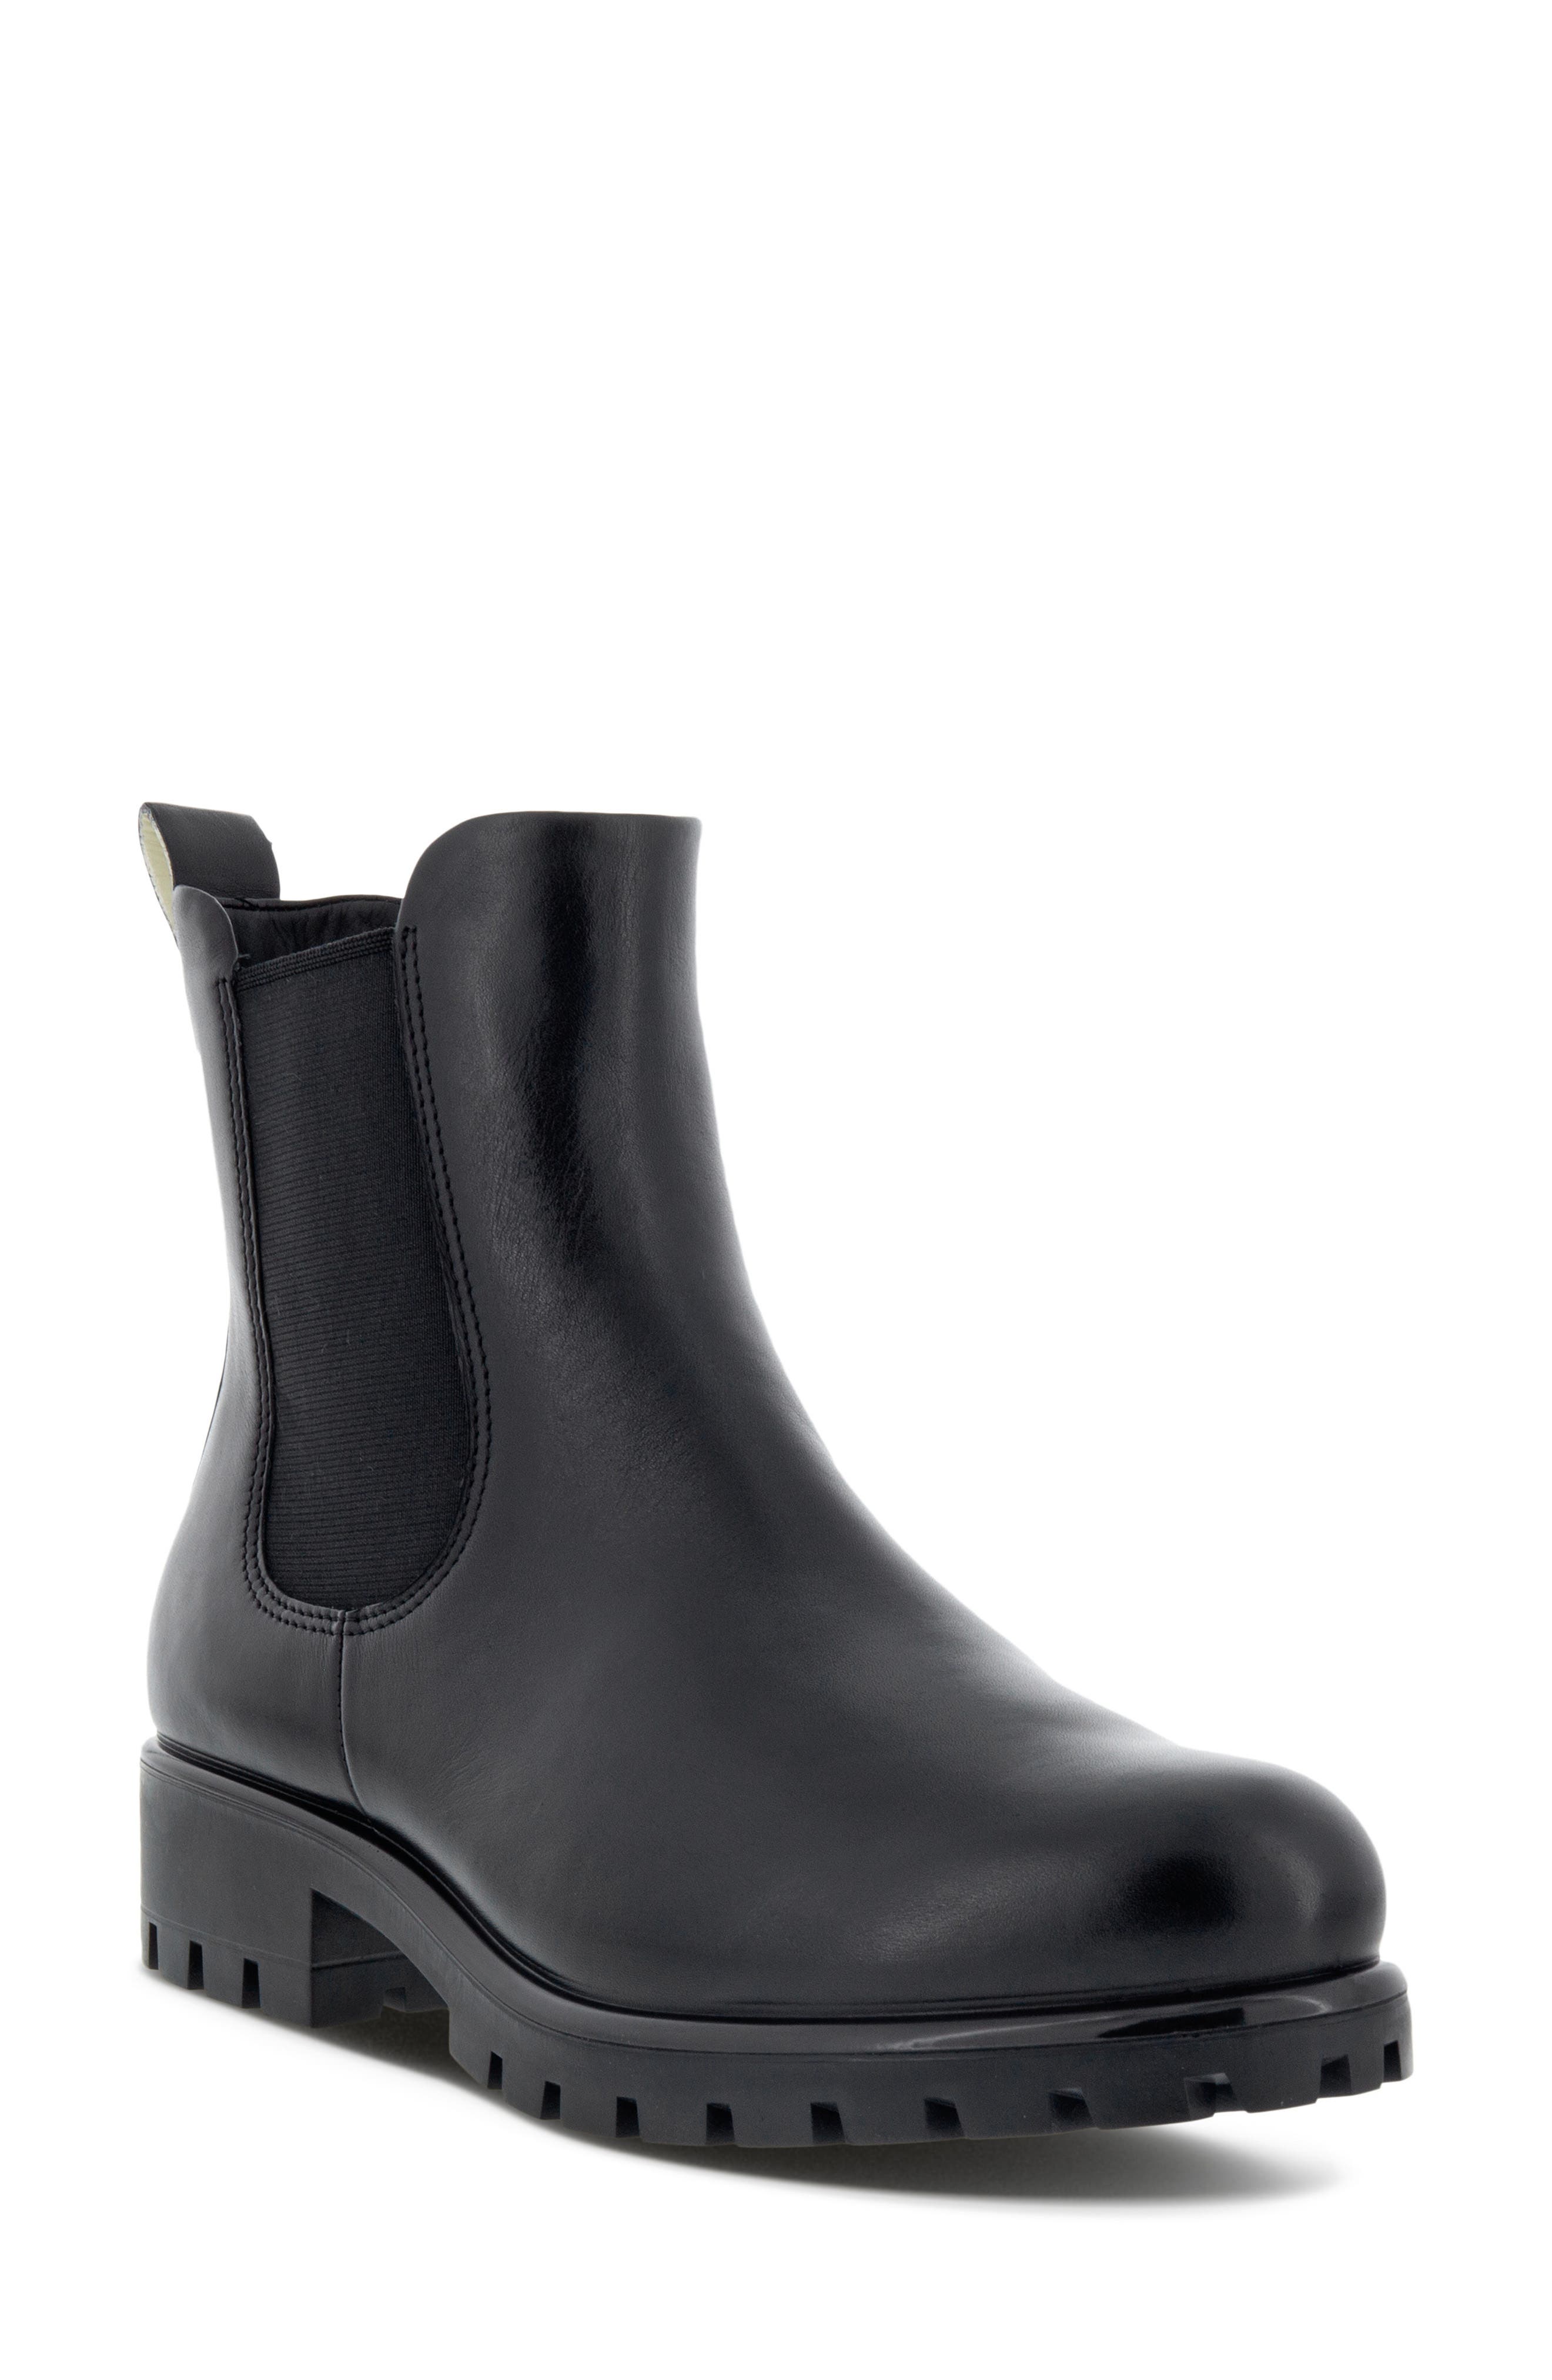 ecco boots for women